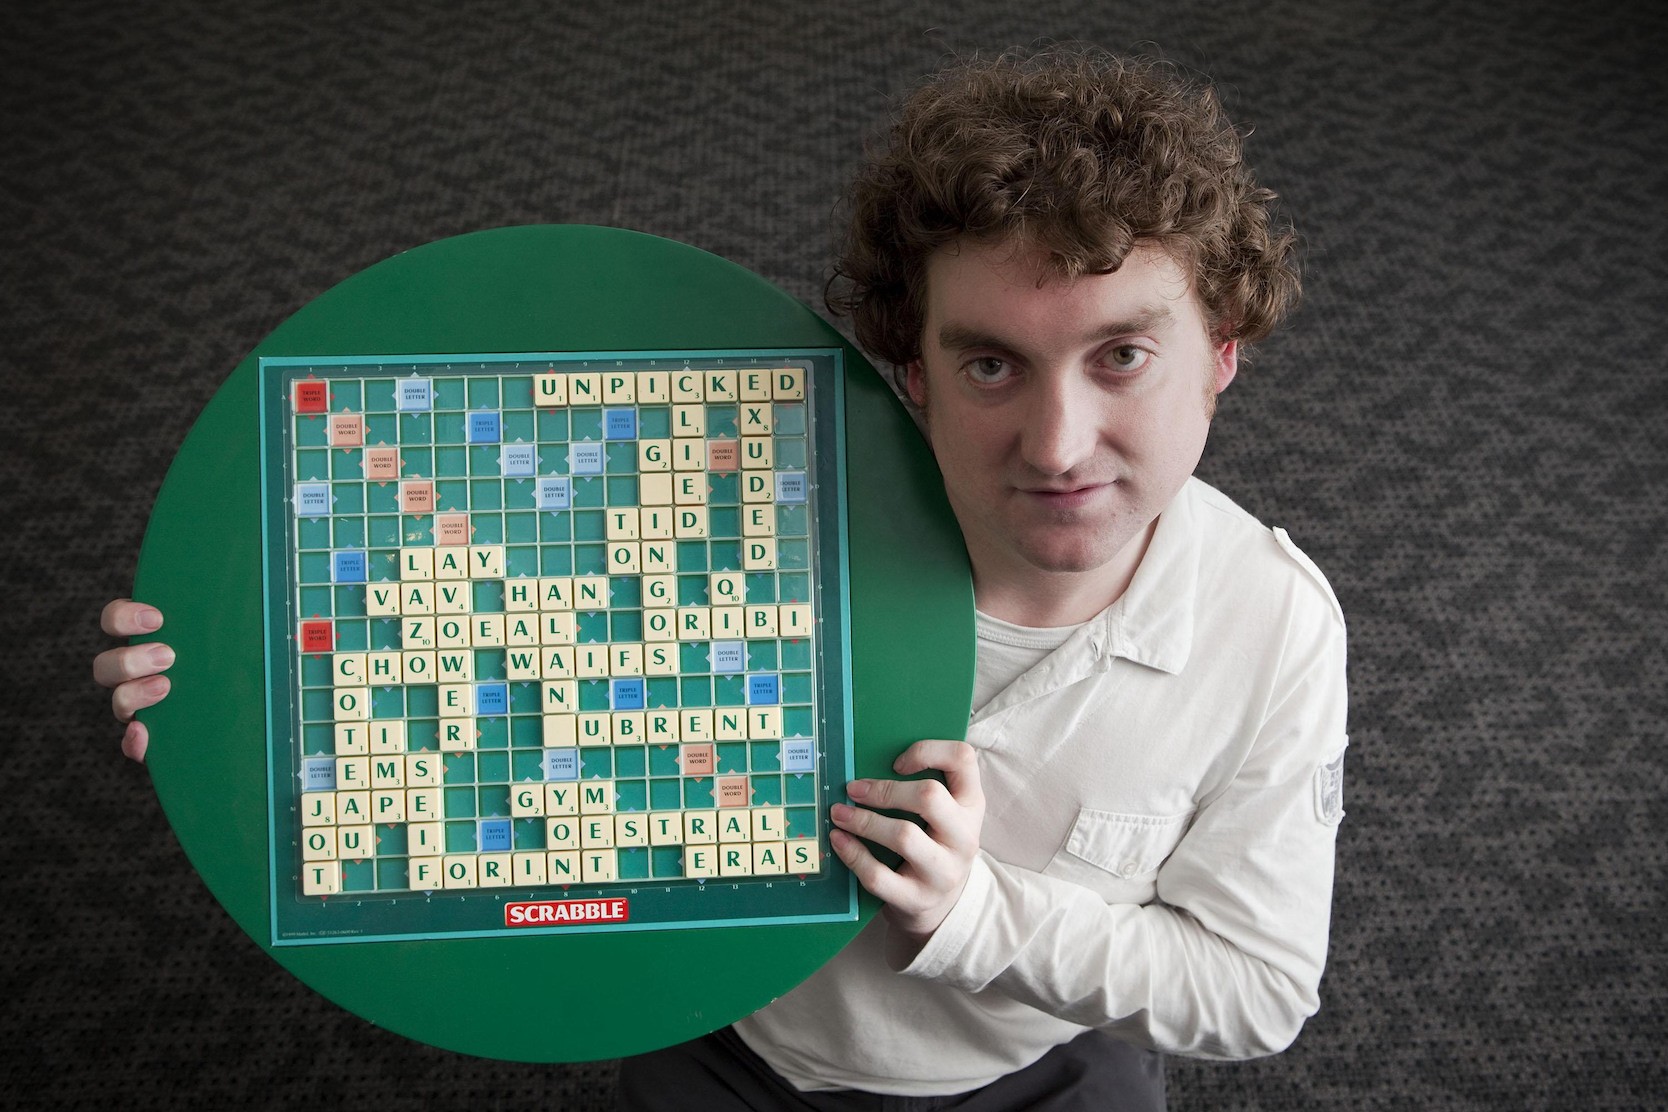 Scrabble Championship Winners and Famous Facts